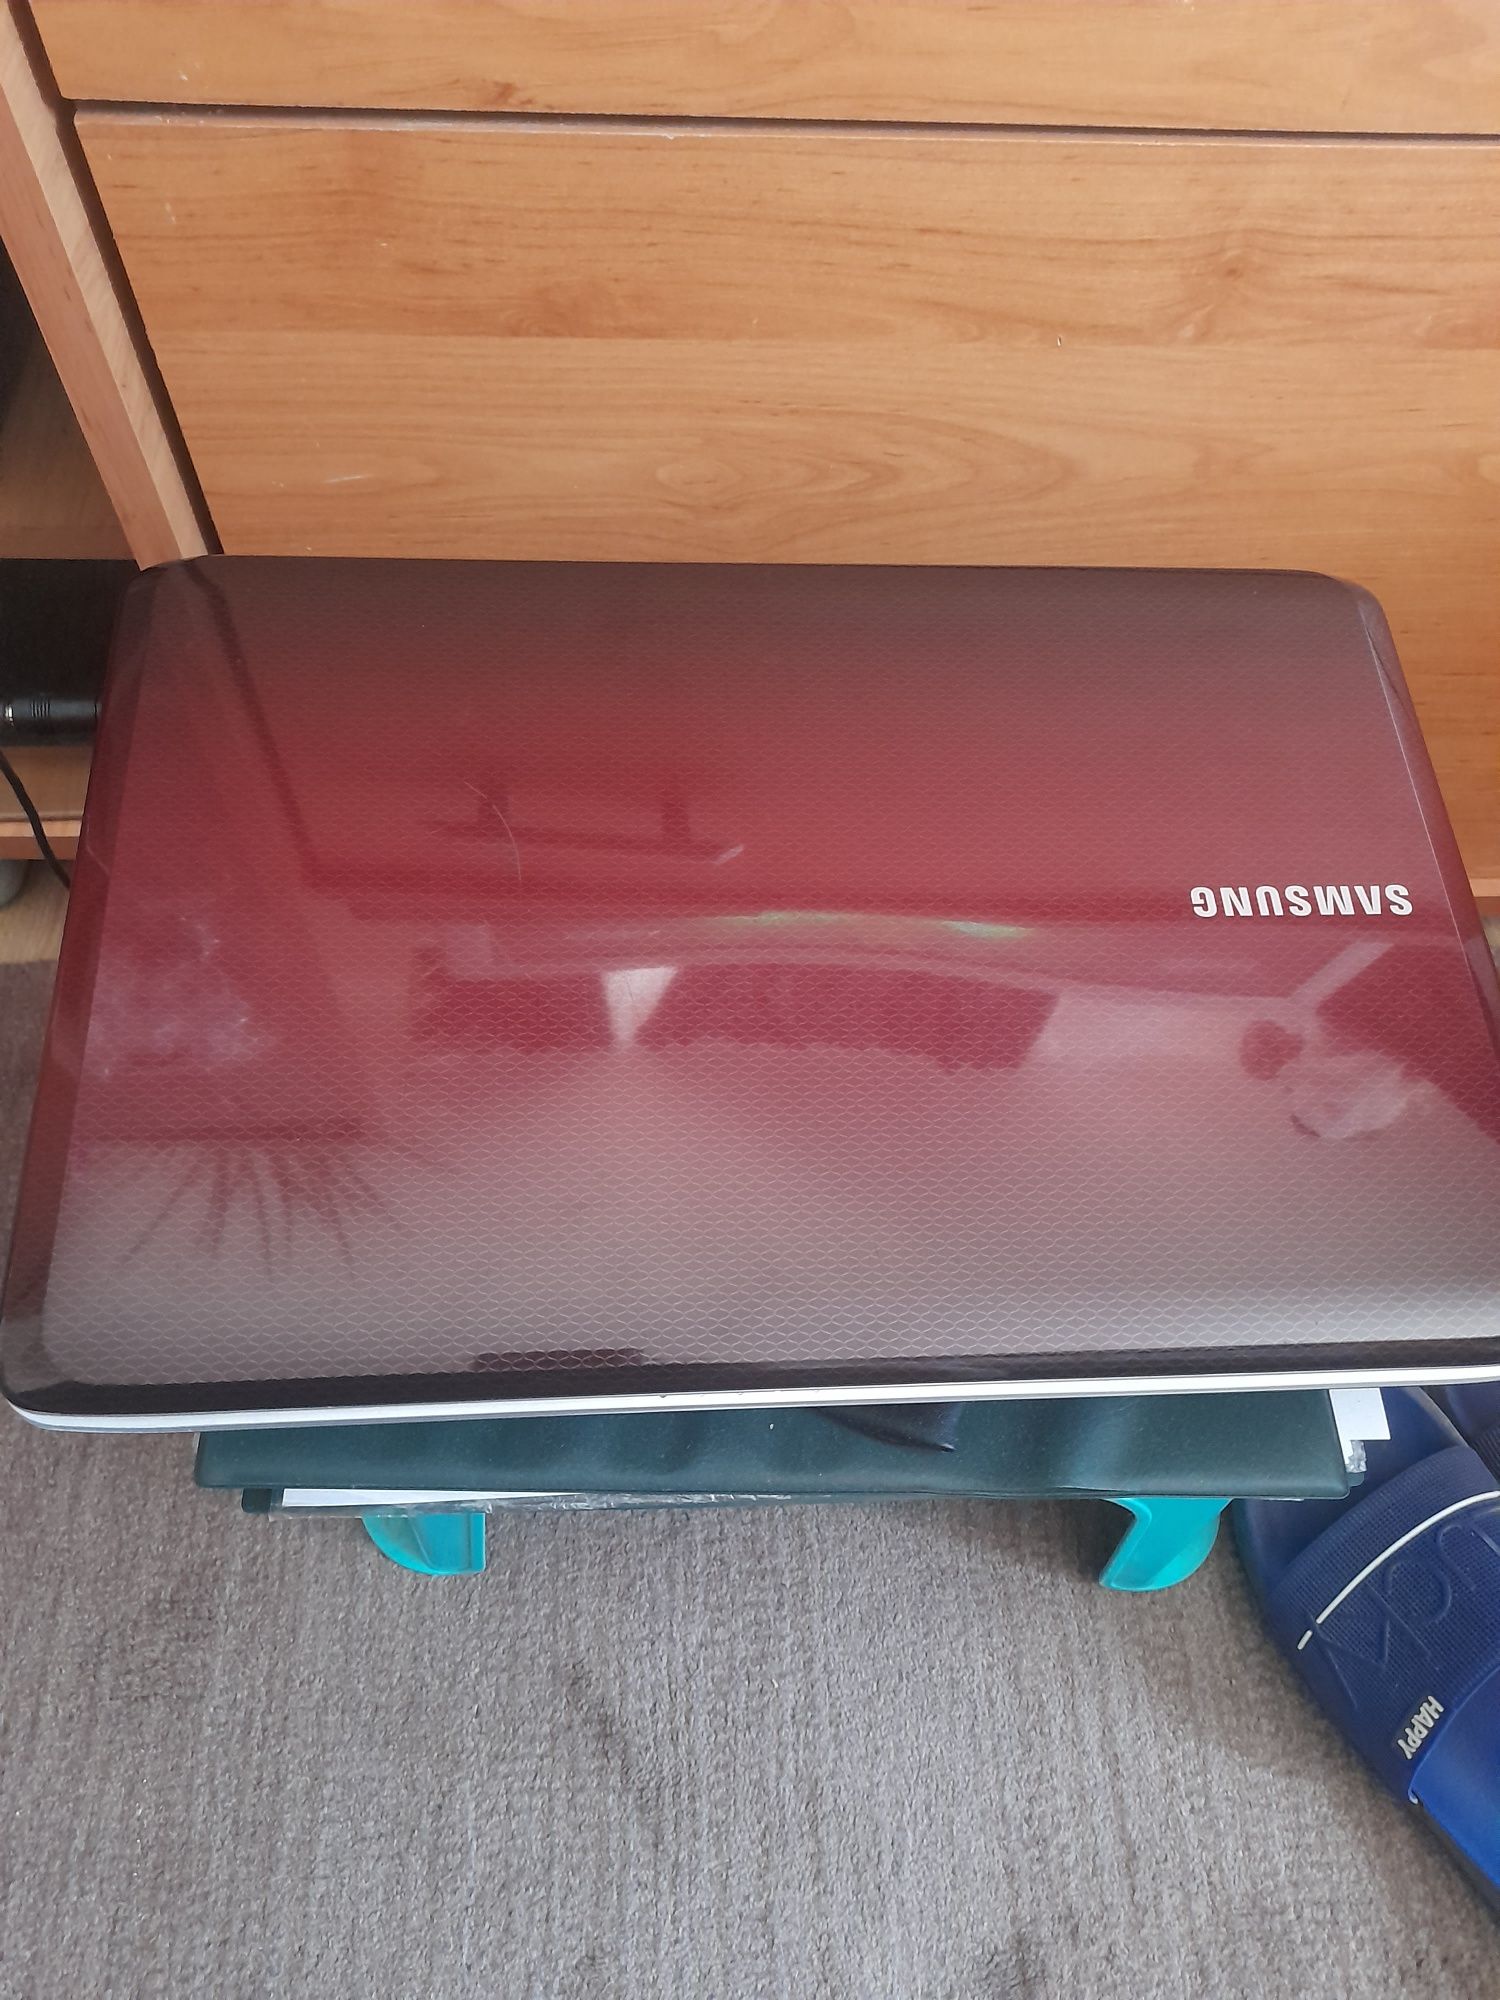 Laptop Samsung Intel dual core ddr 3 perfect functional